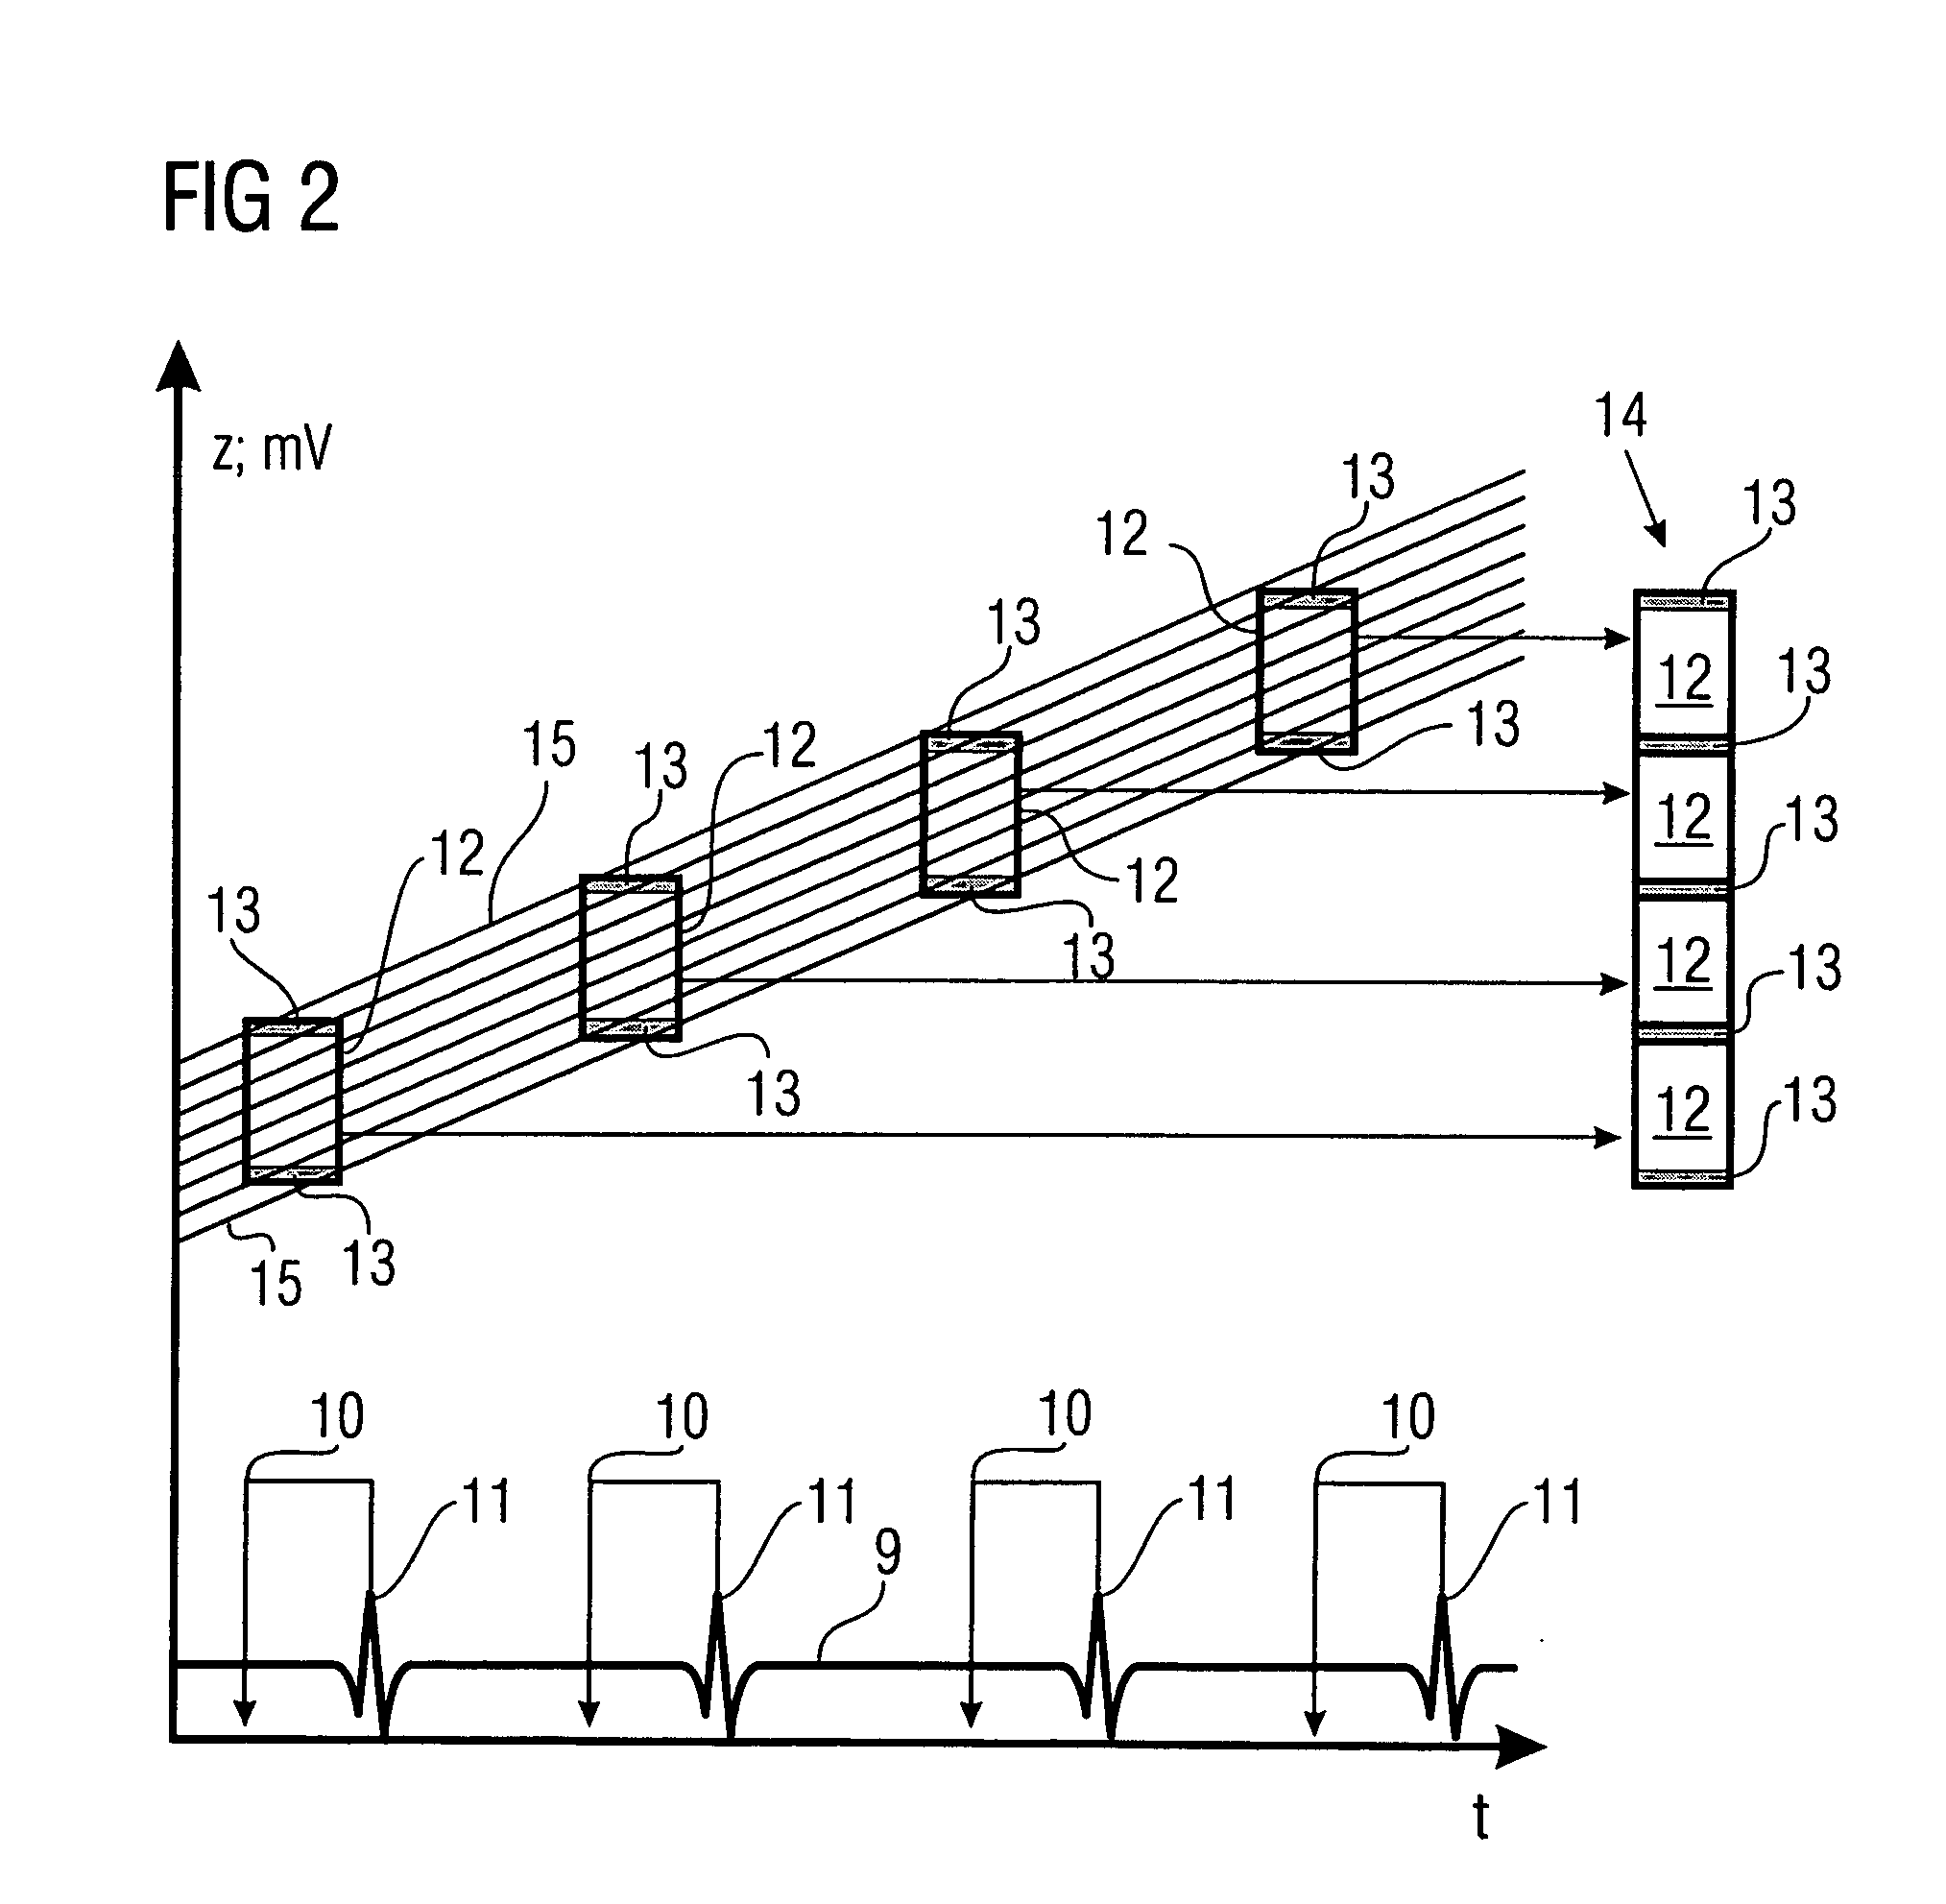 Method for producing CT images of an examination object having a periodically moving subregion